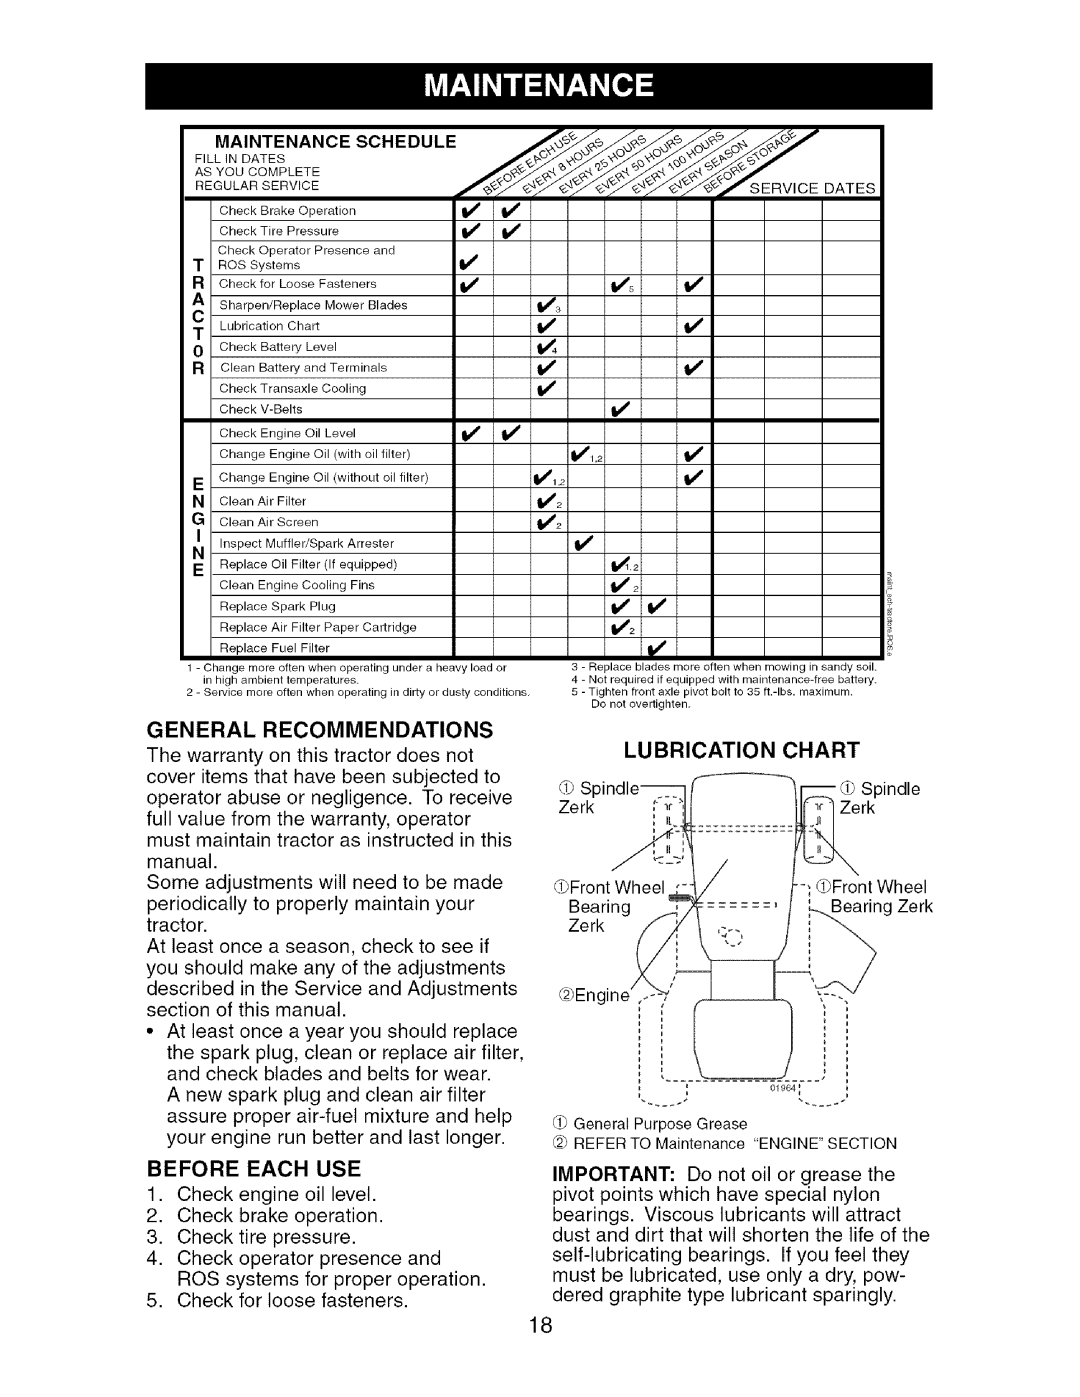 Craftsman 917.275764 owner manual Ma,.Te.A.Scce.Eoule, Before Each Use, Lubrication, Chart, General Recommendations 